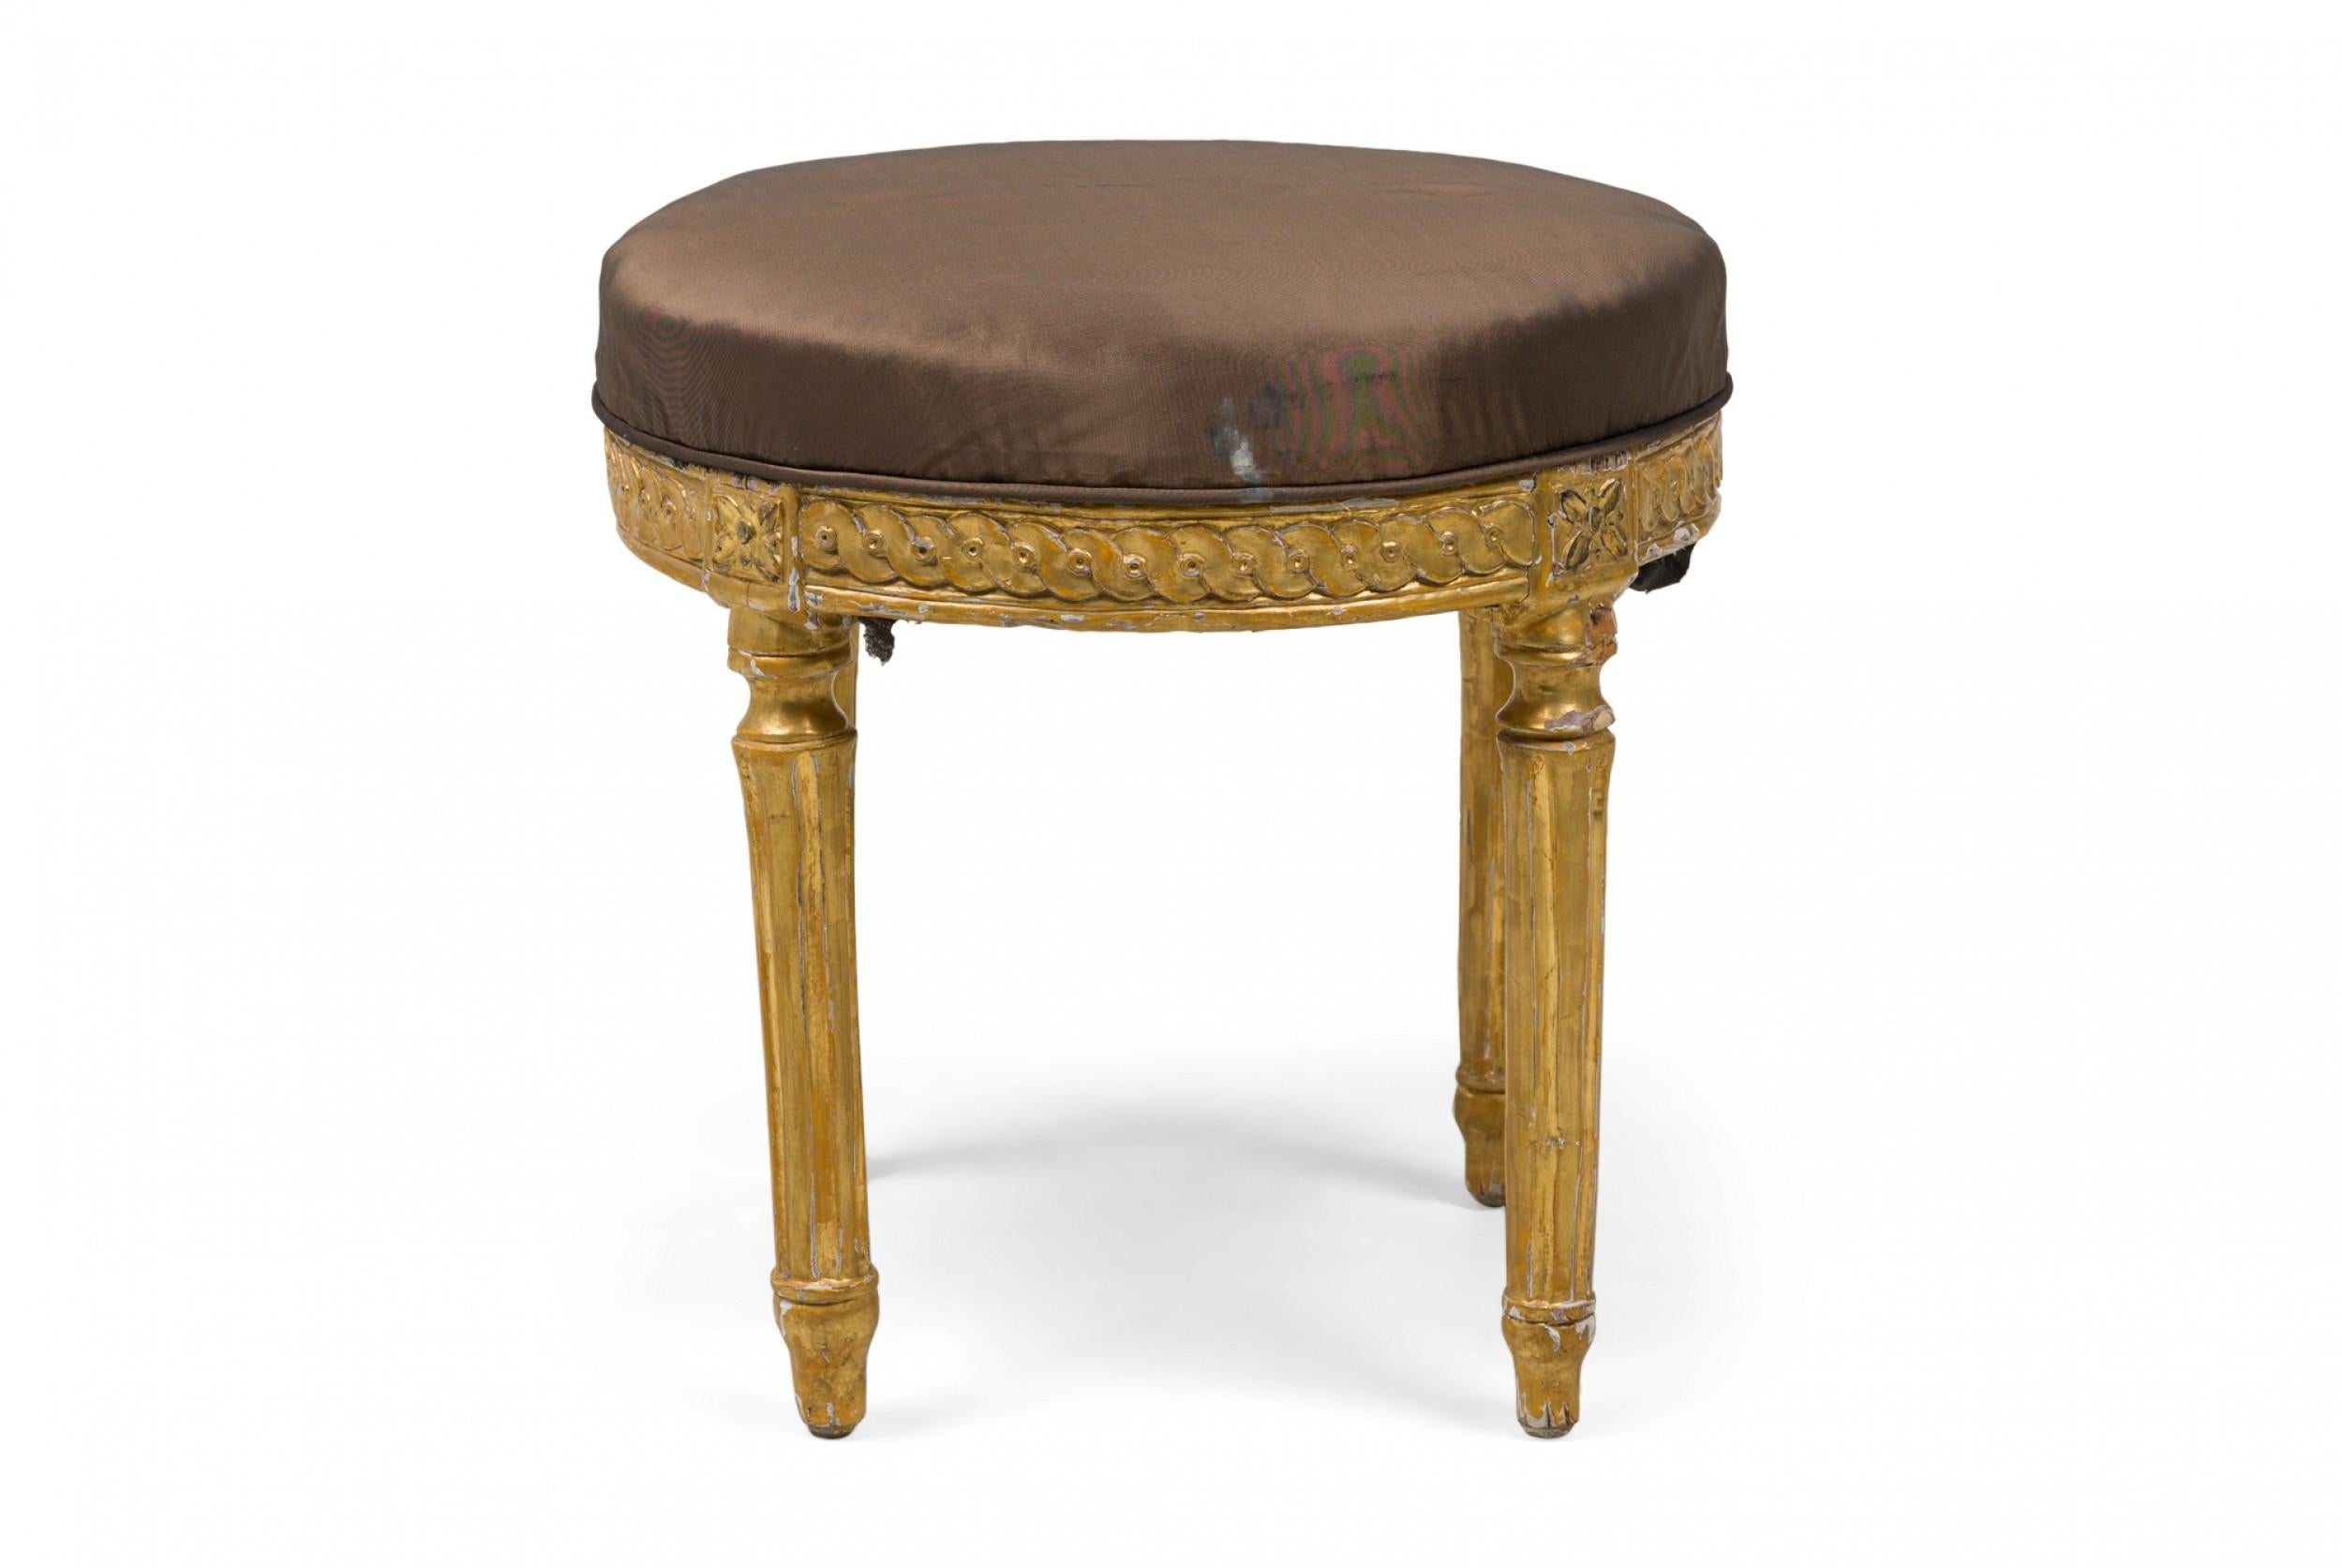 Fabric Pair of Italian Neo-Classic Giltwood Upholstered Taborets / Benches / Stools For Sale